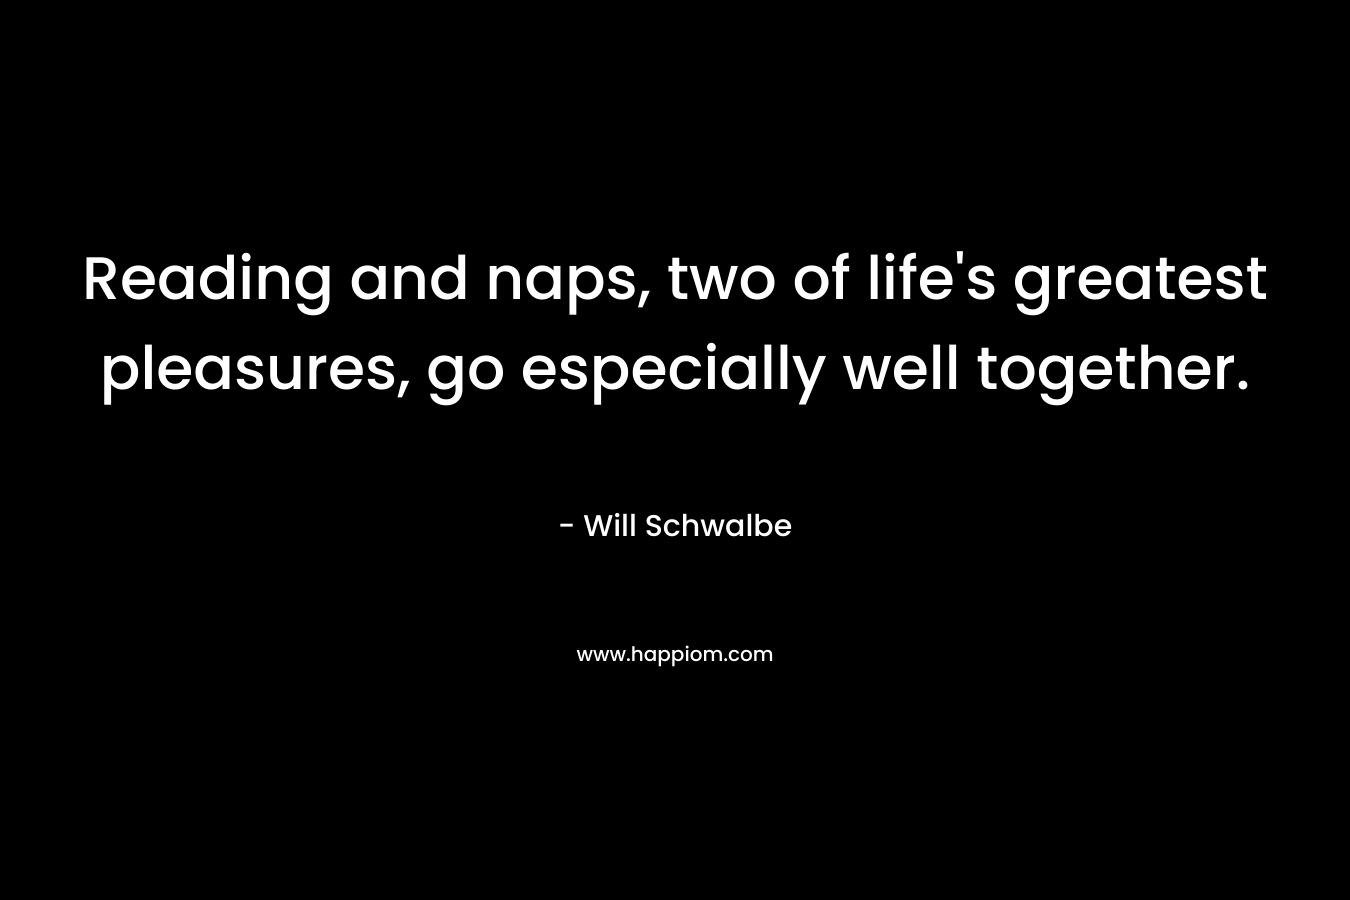 Reading and naps, two of life’s greatest pleasures, go especially well together. – Will Schwalbe